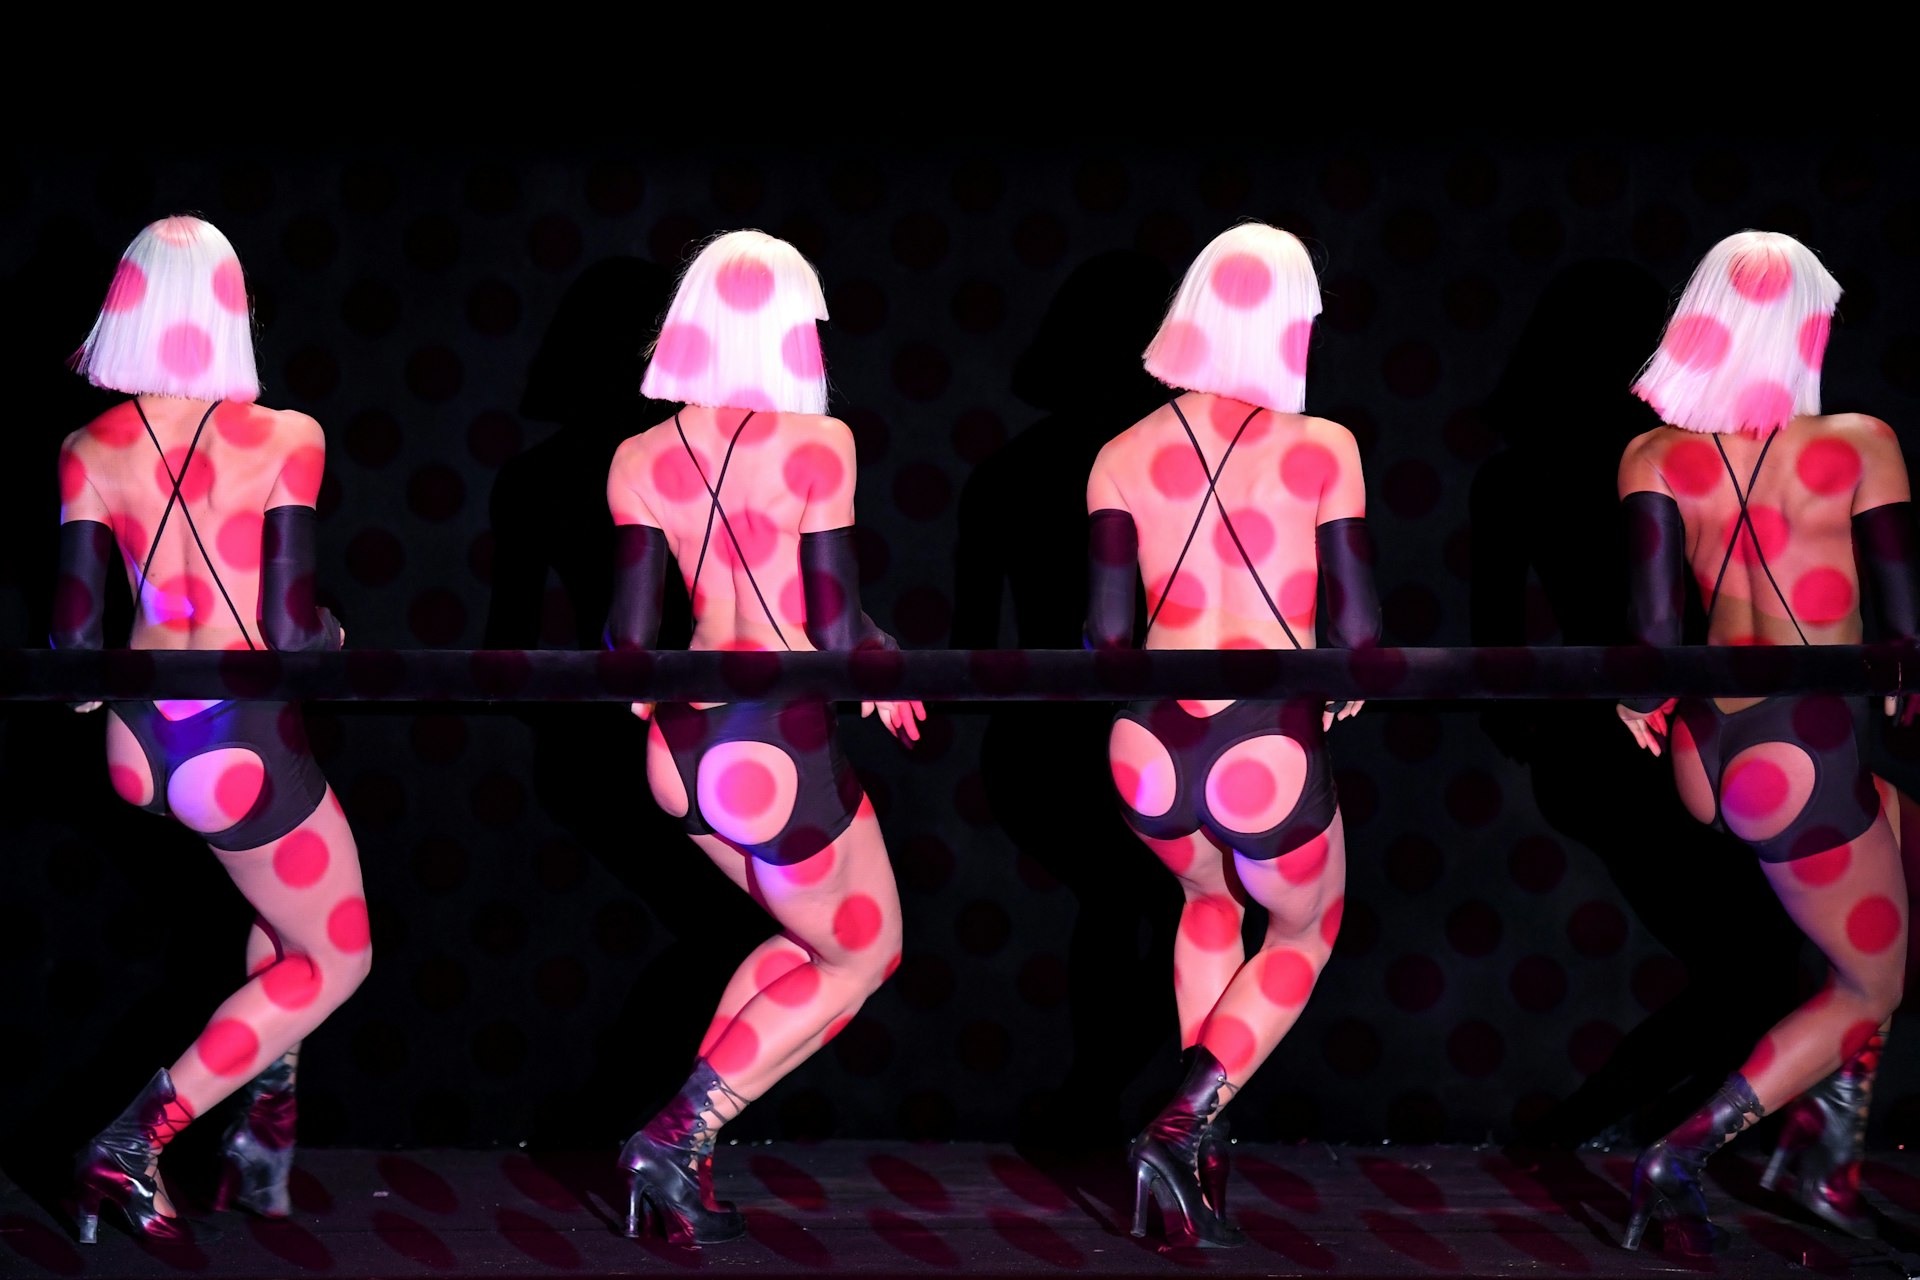 Dancers with polka dot lighting on the stage of the Crazy Horse cabaret, Paris, France